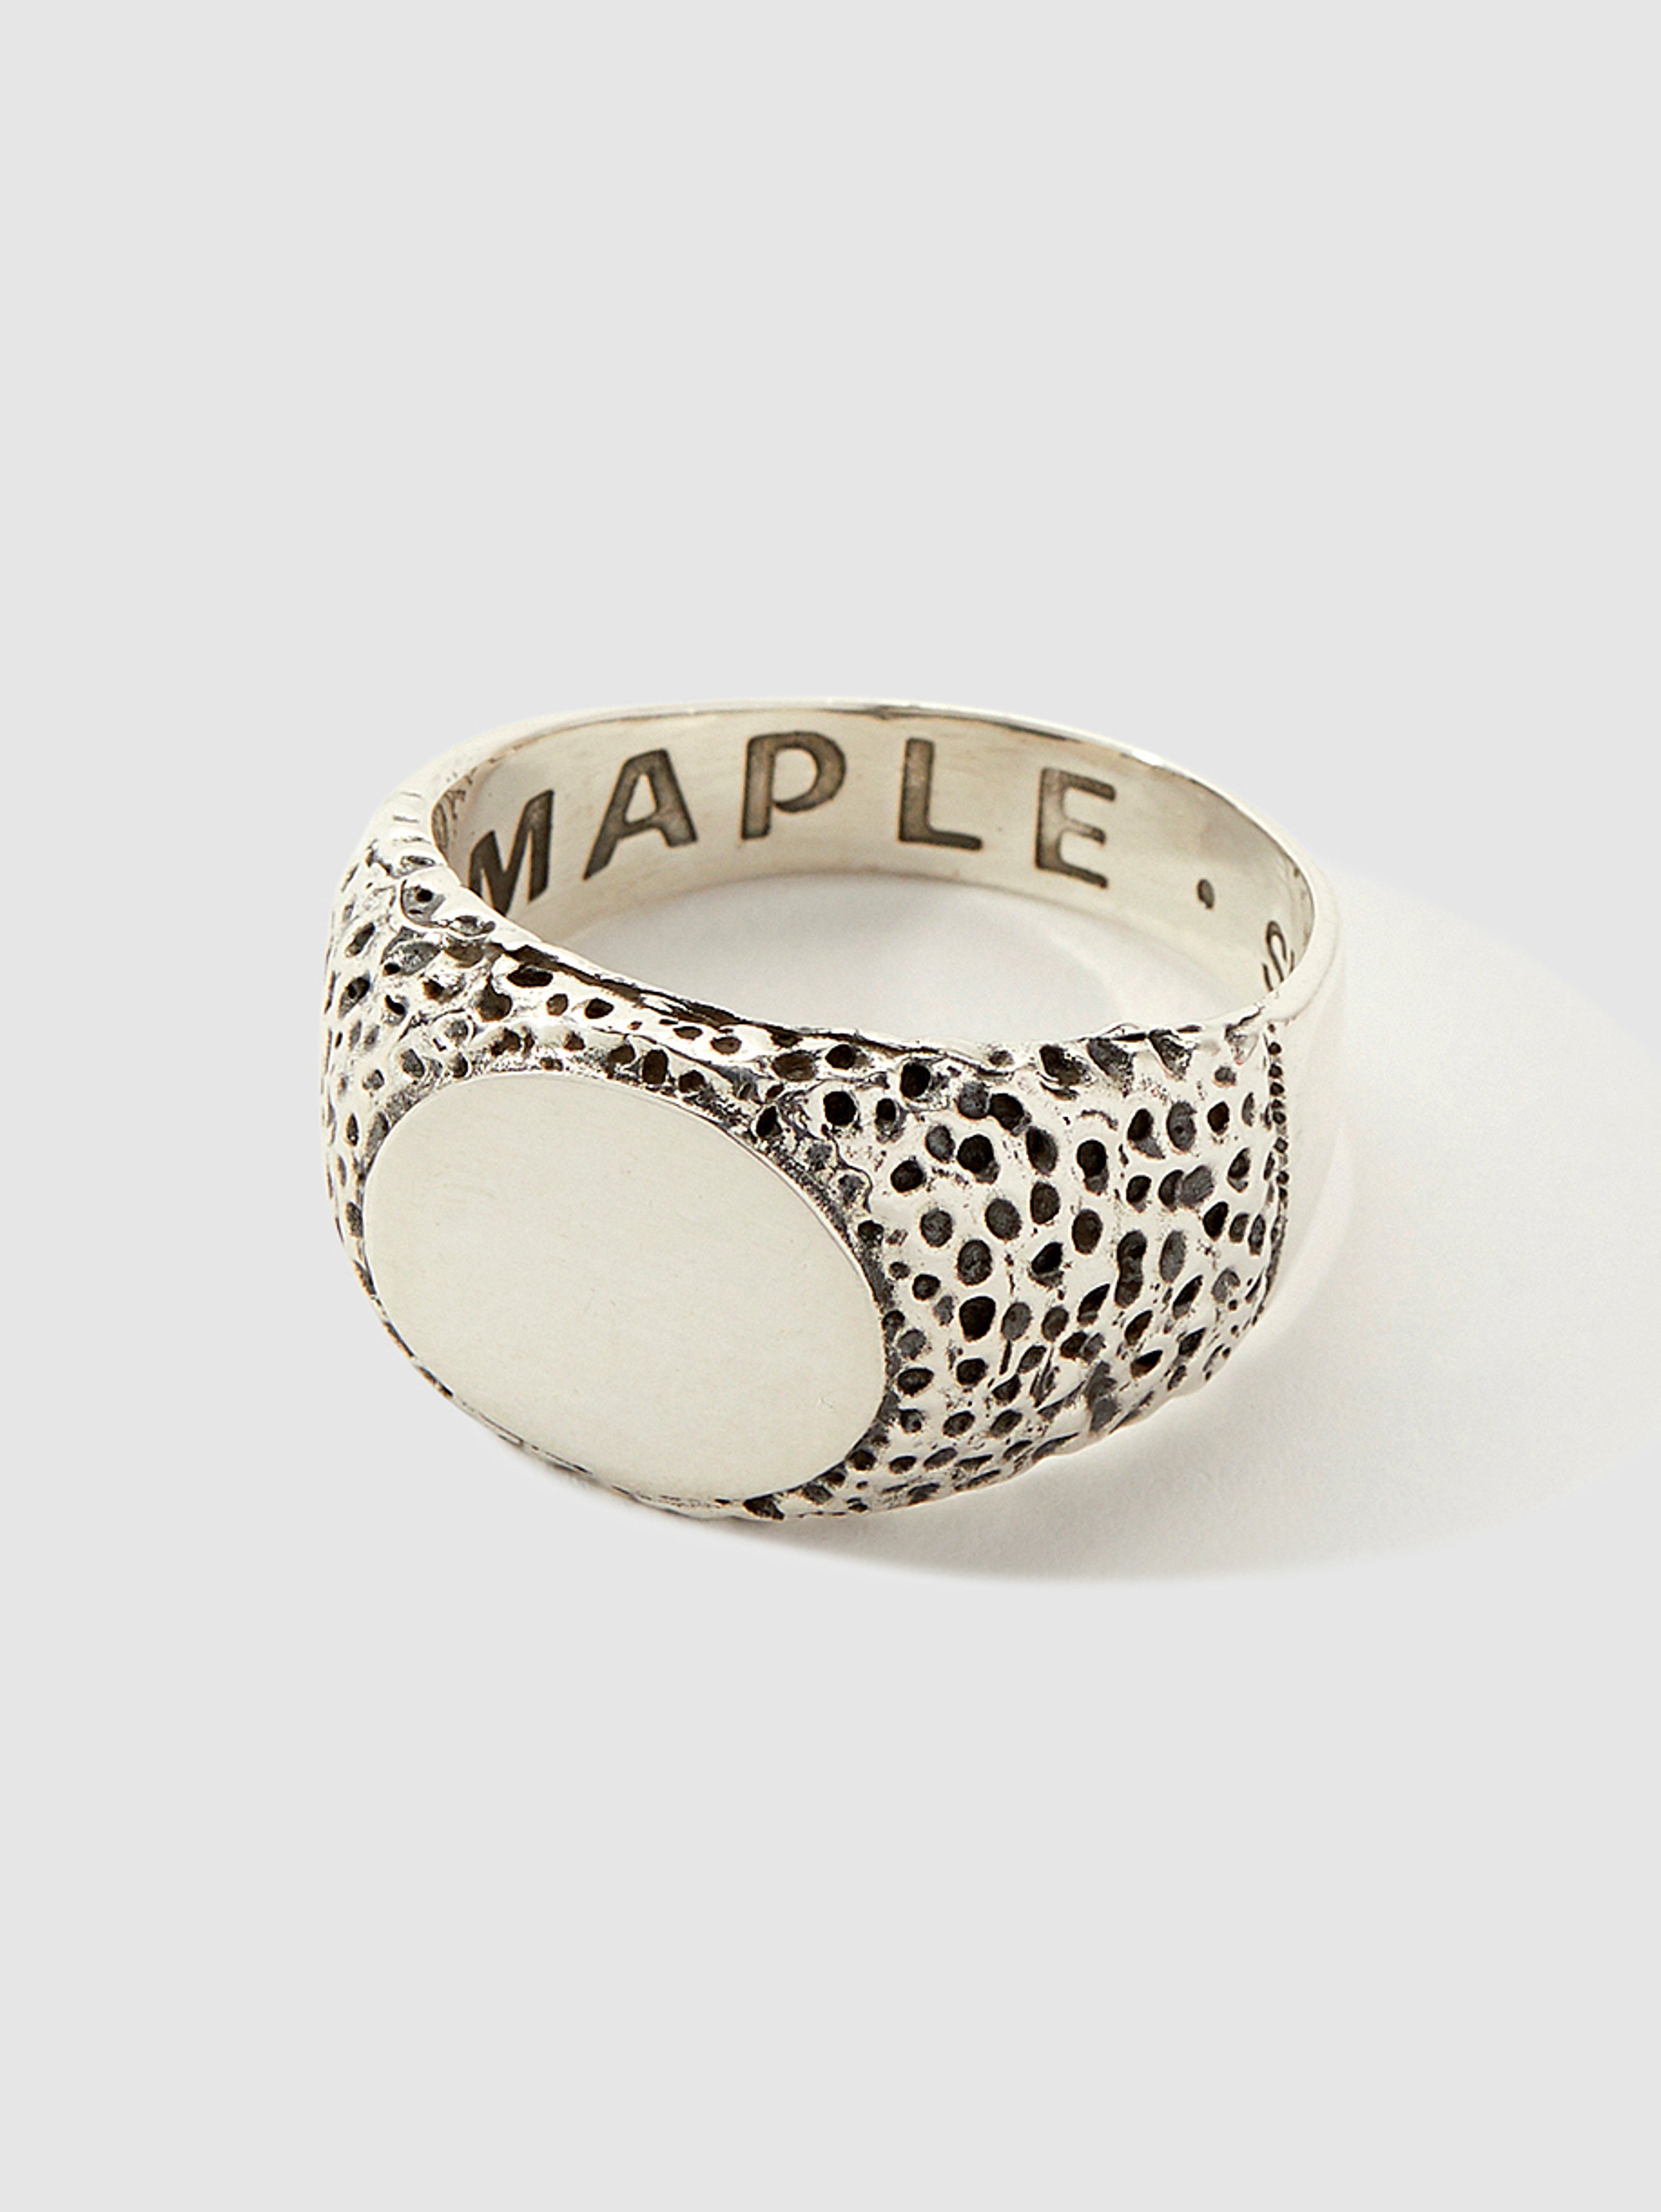 MAPLE MAPLE NUGGET RING